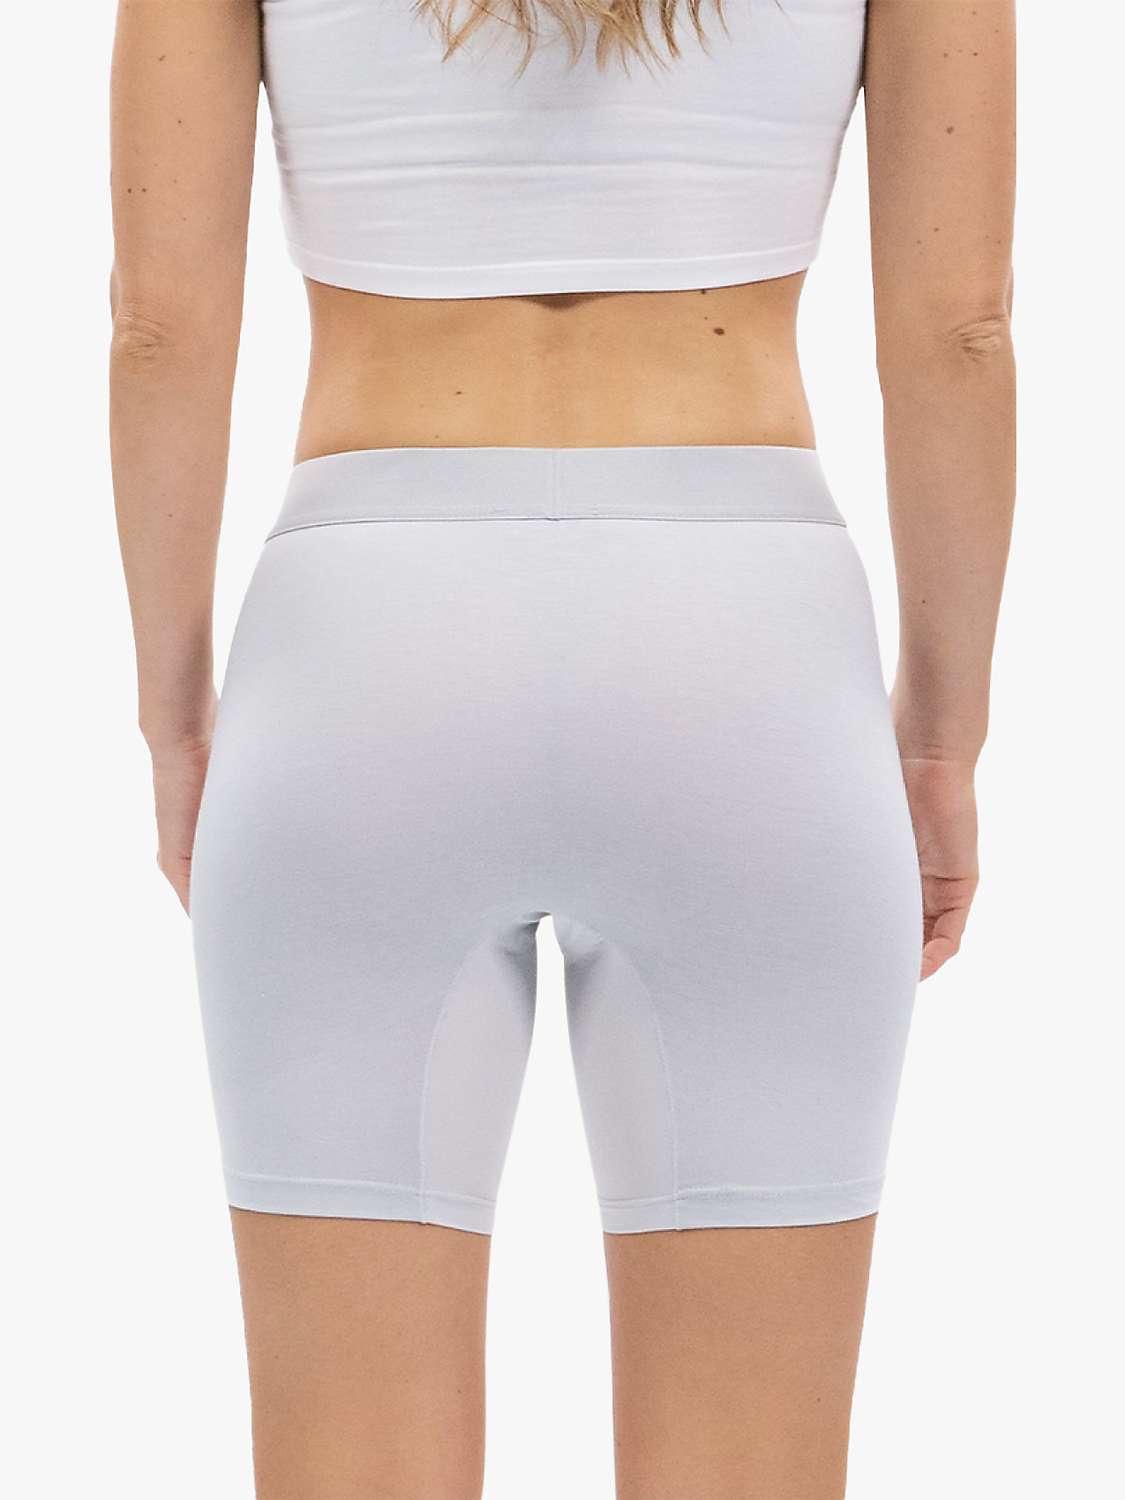 Buy Step One Bamboo Body Shorts, Pack of 5 Online at johnlewis.com